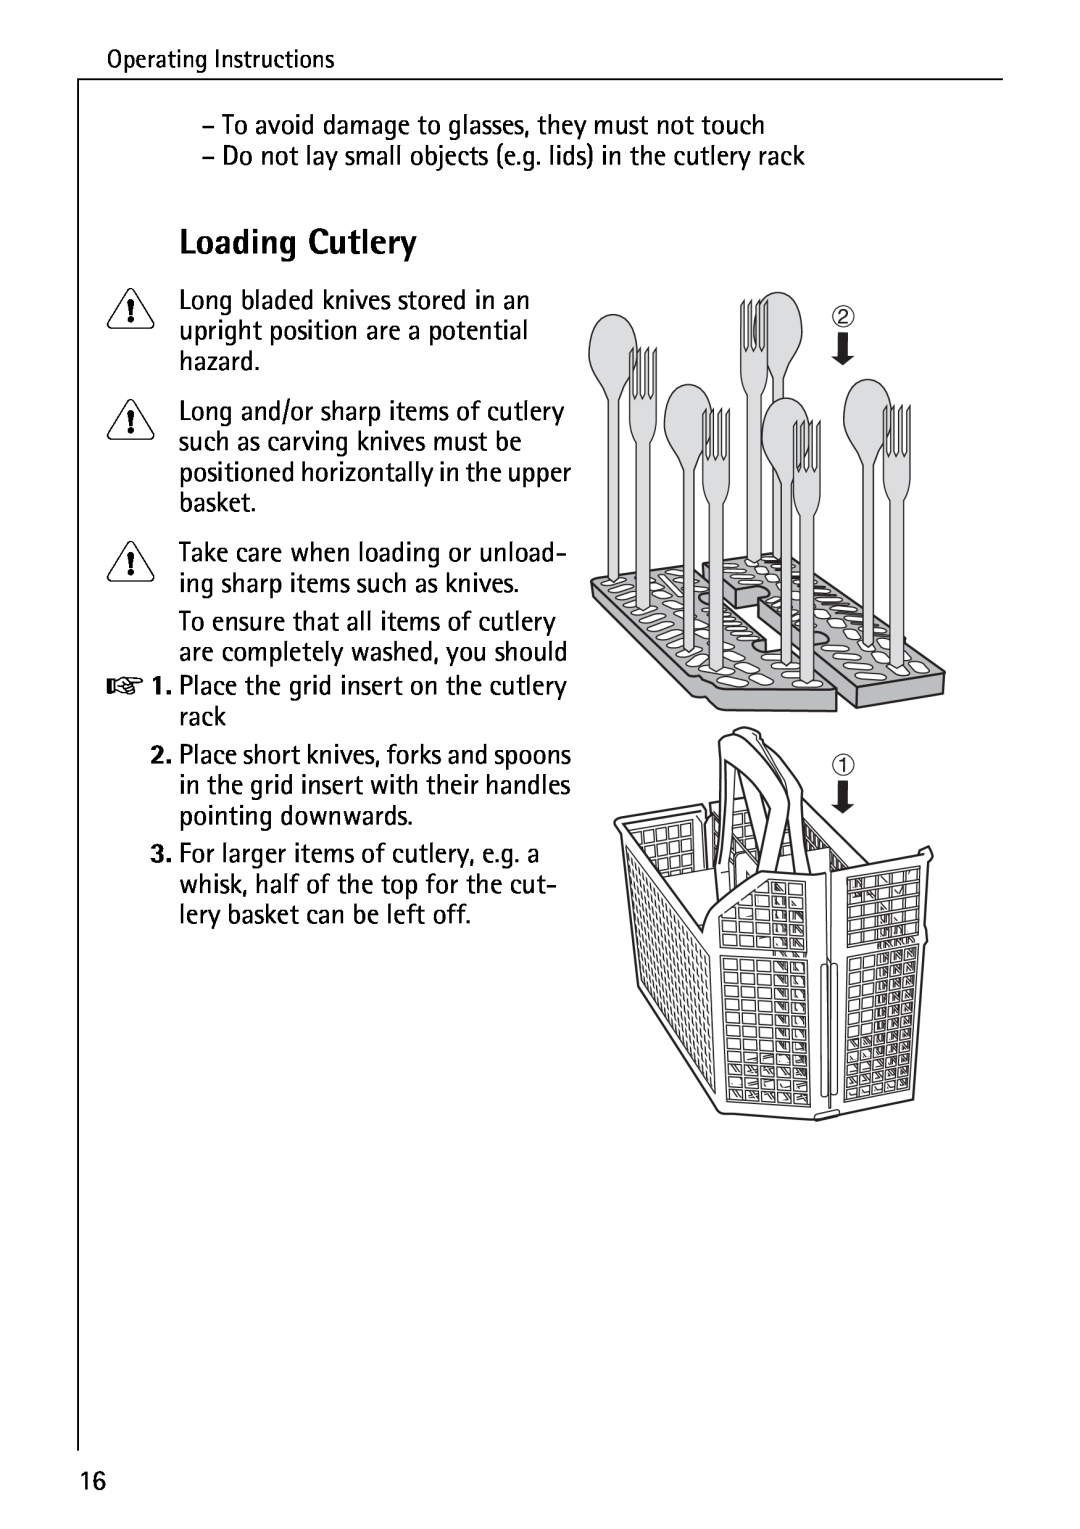 Electrolux 50610 manual Loading Cutlery, Do not lay small objects e.g. lids in the cutlery rack 